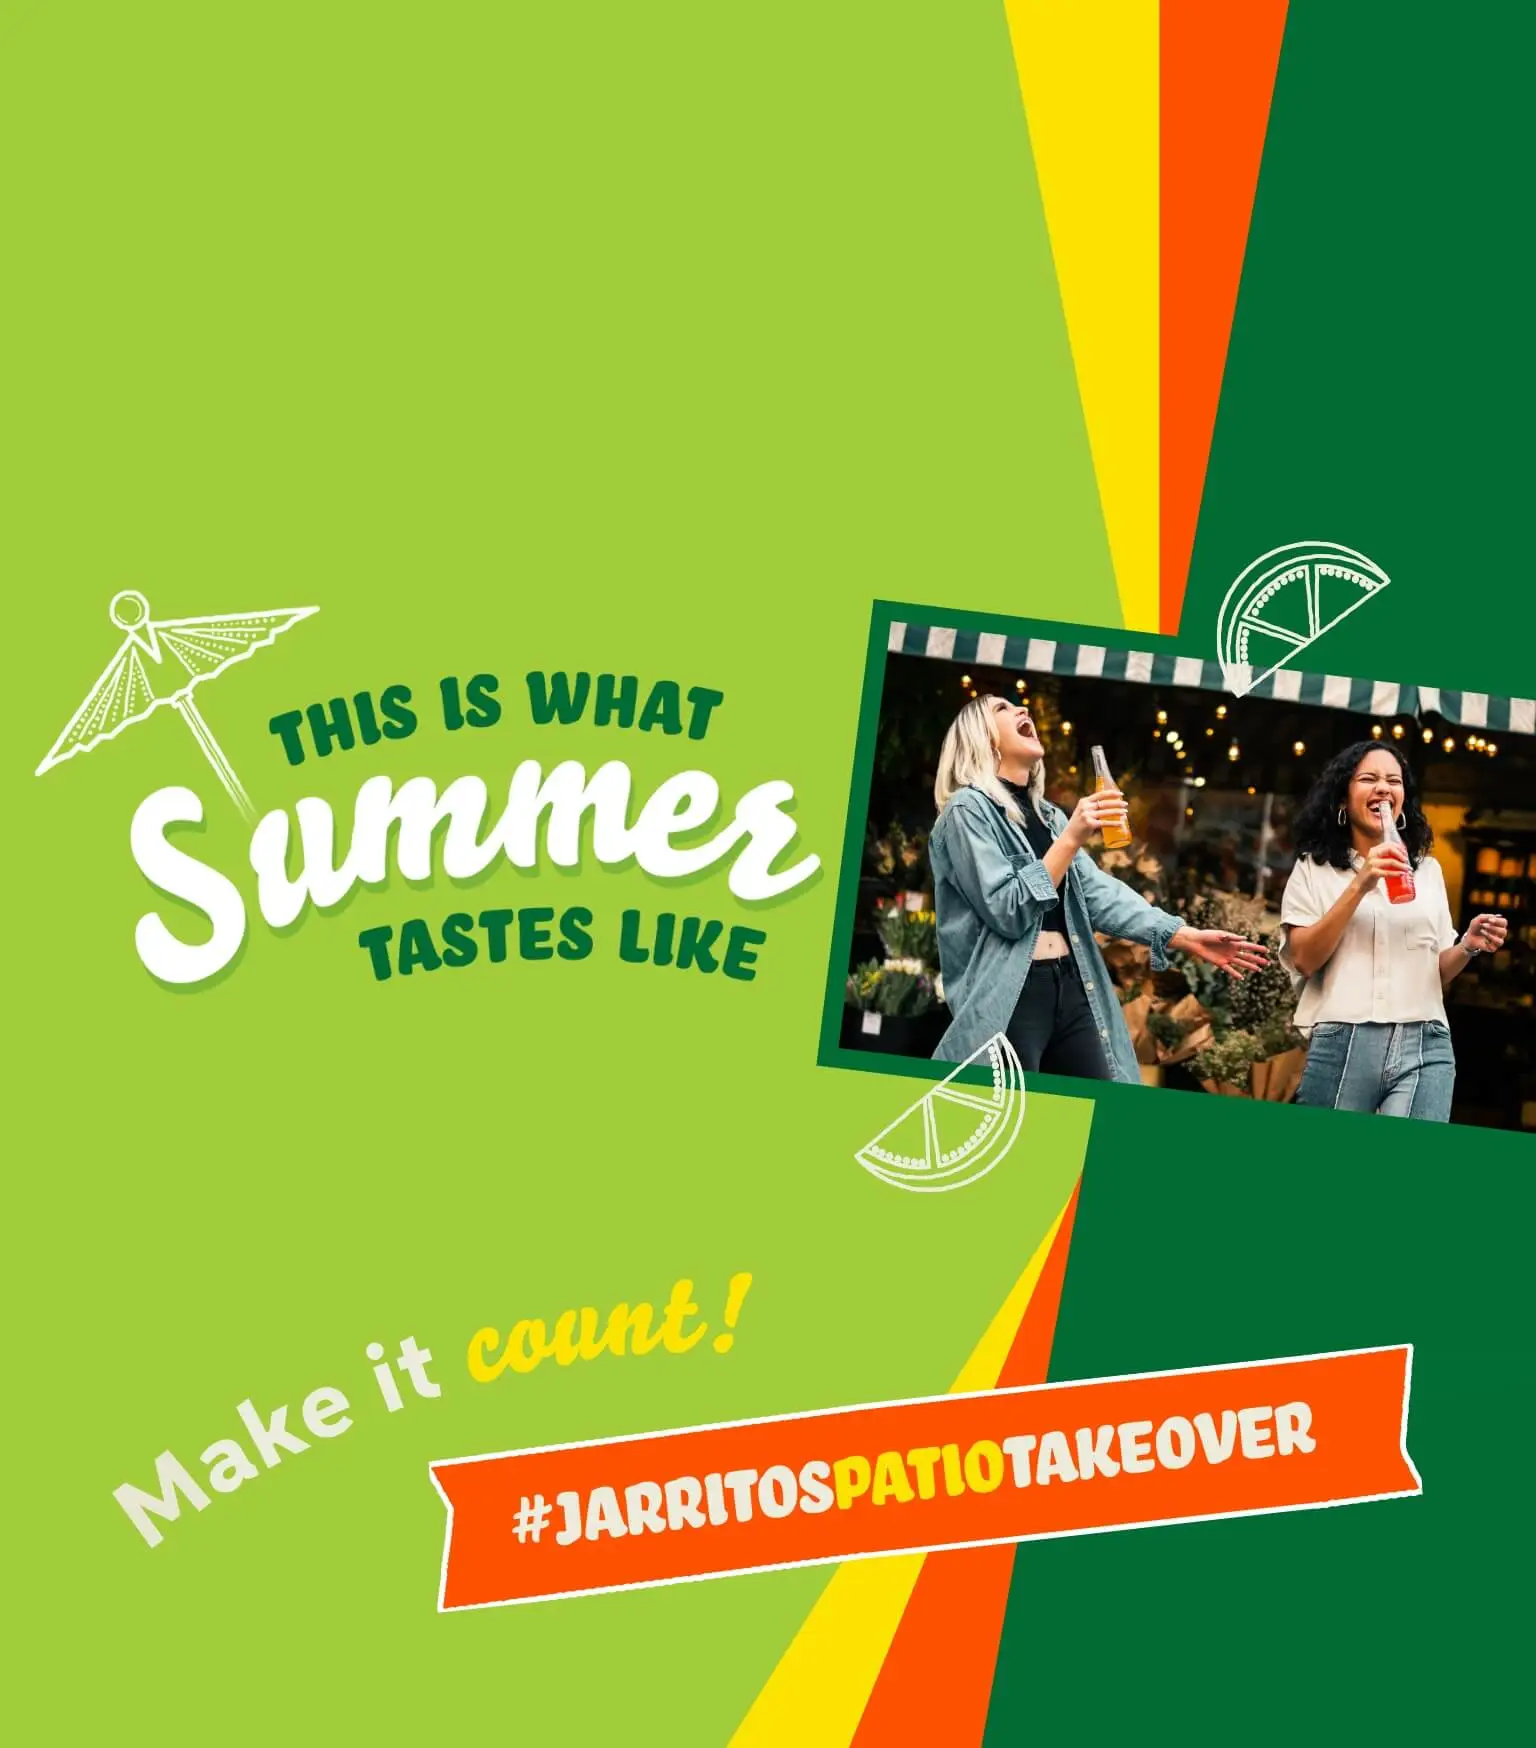 This is what Summer Tastes Like
		Make it count! #jarritospatiotakeover